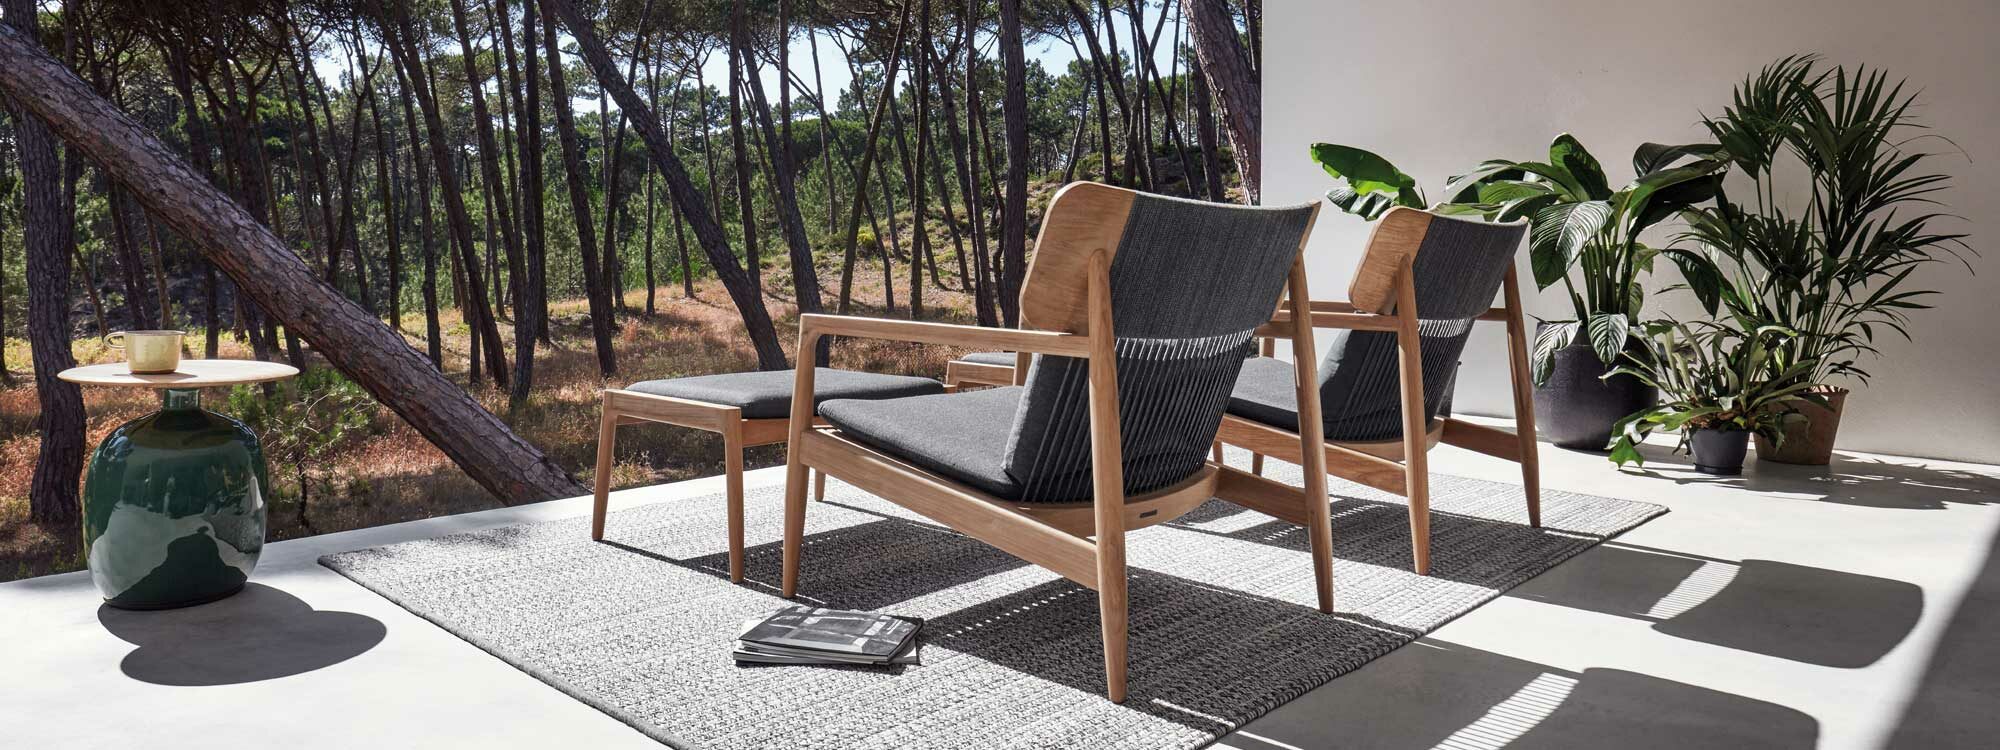 Image of Archi teak lounge chairs and Blow modern low table by Gloster on sunny terrace, with arid woodland in the background